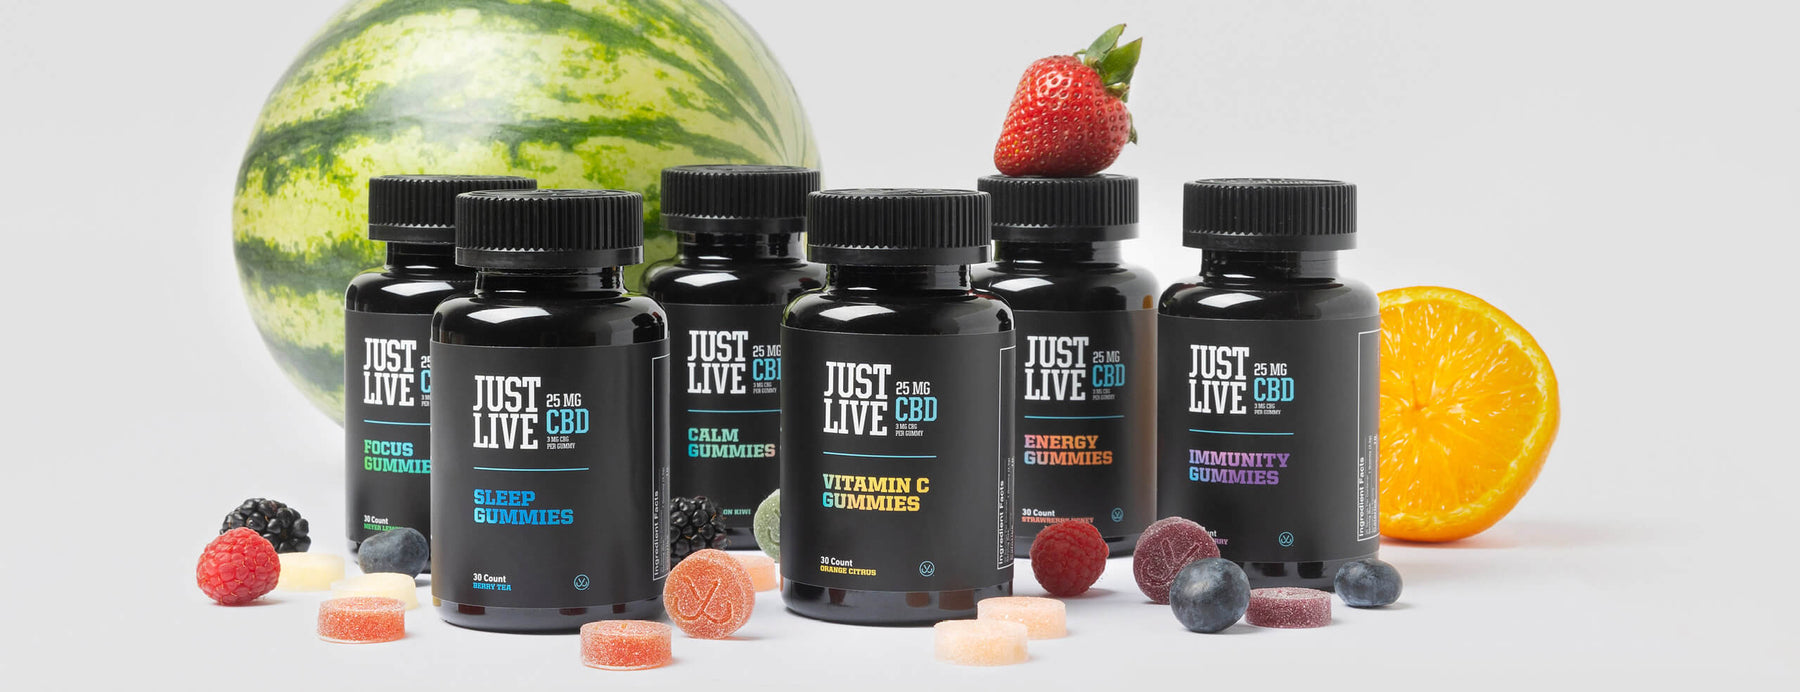 Landscape Image of All Six CBD Gummies from Just Live with Fresh Fruit and Individual Gummies. Benefits of Gummies include: Sleep, Calm, Focus, Energy, Immunity and Vitamin C